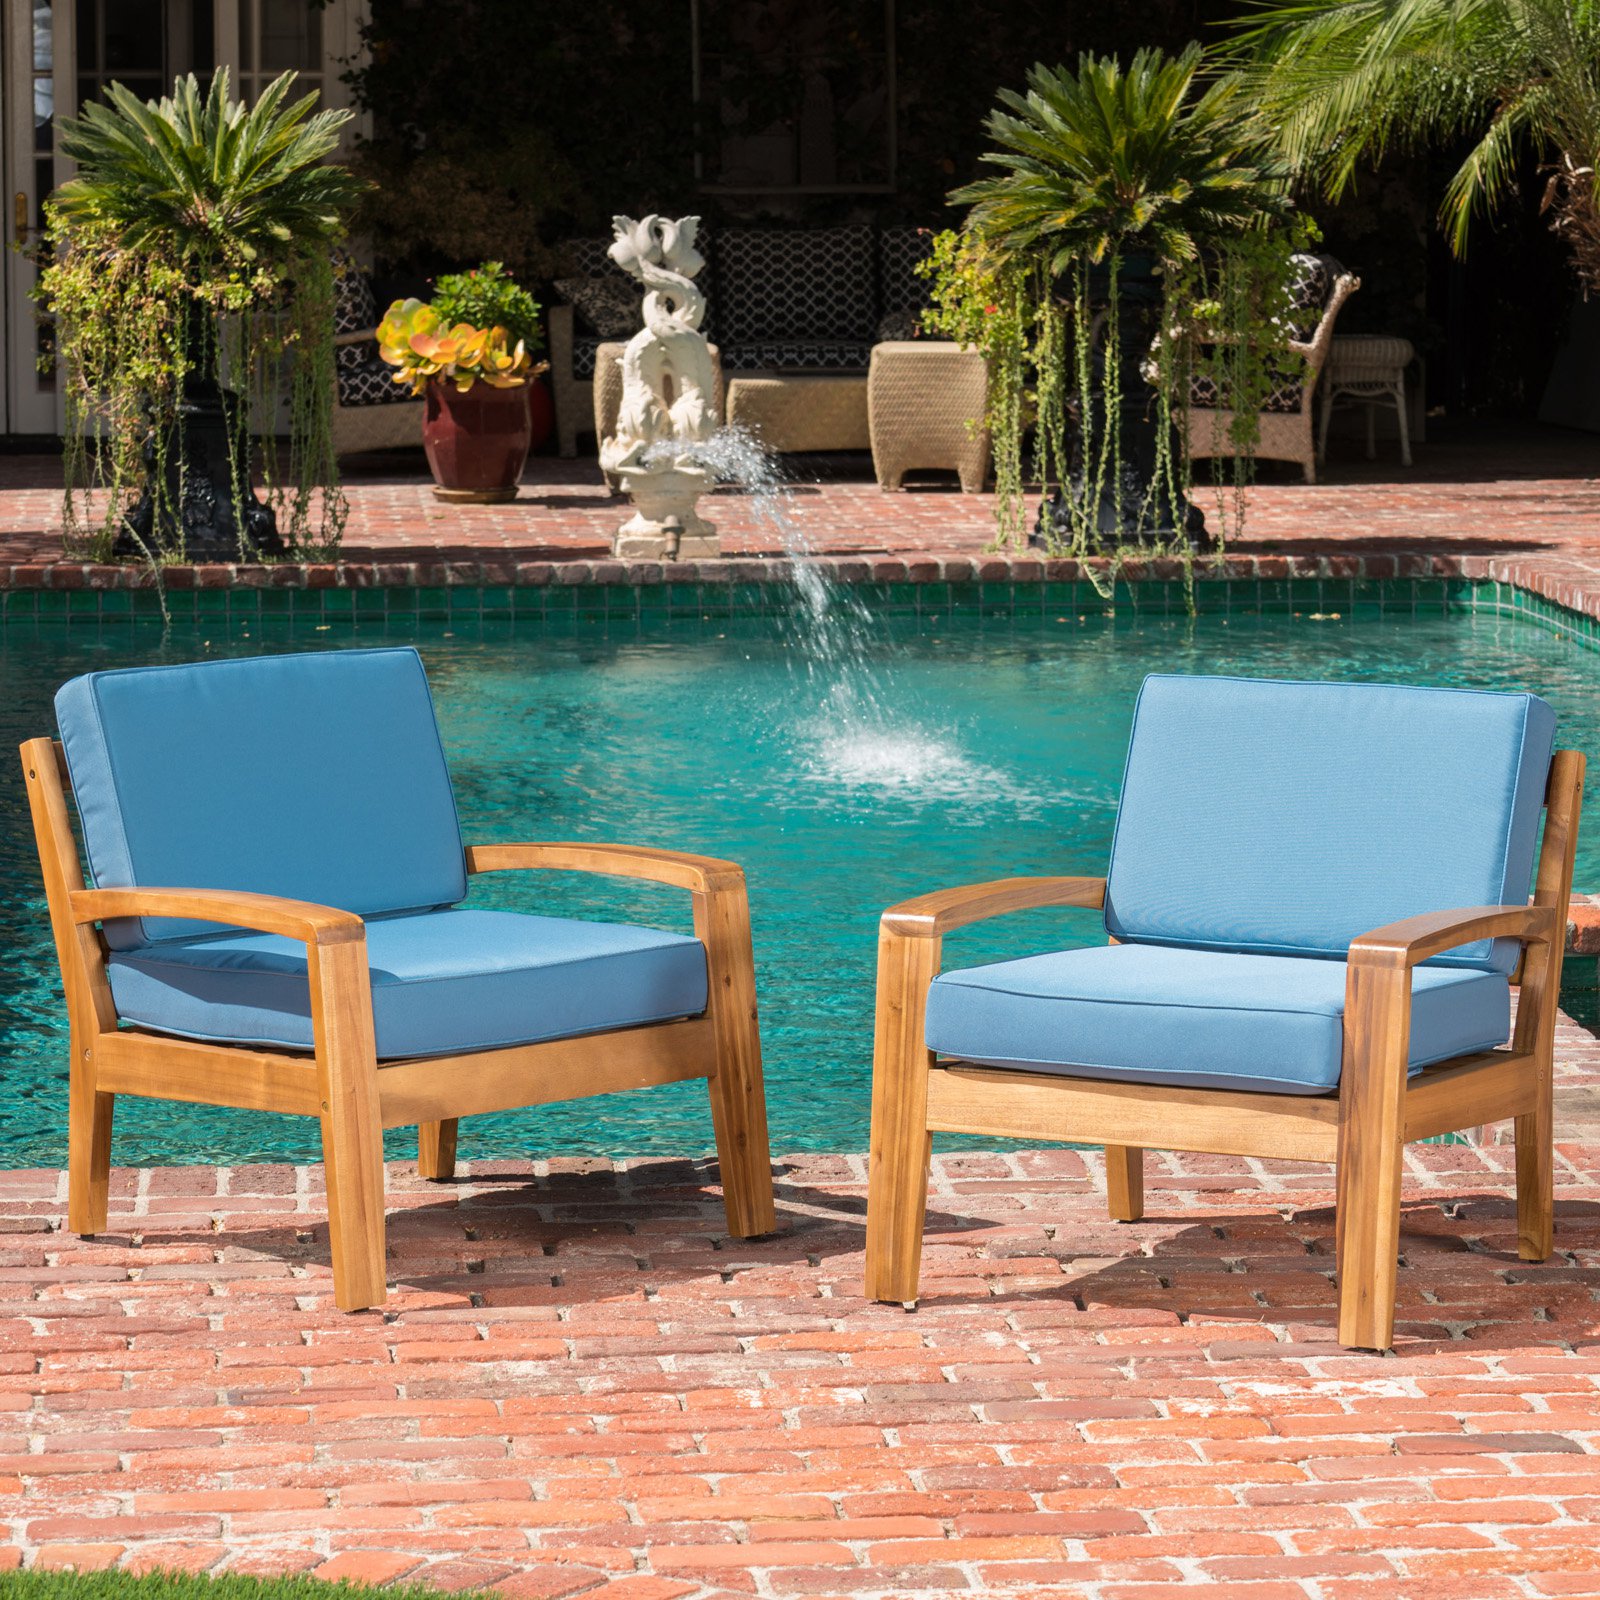 Gorlomi Wooden Patio Club Chairs with Cushions - image 2 of 6